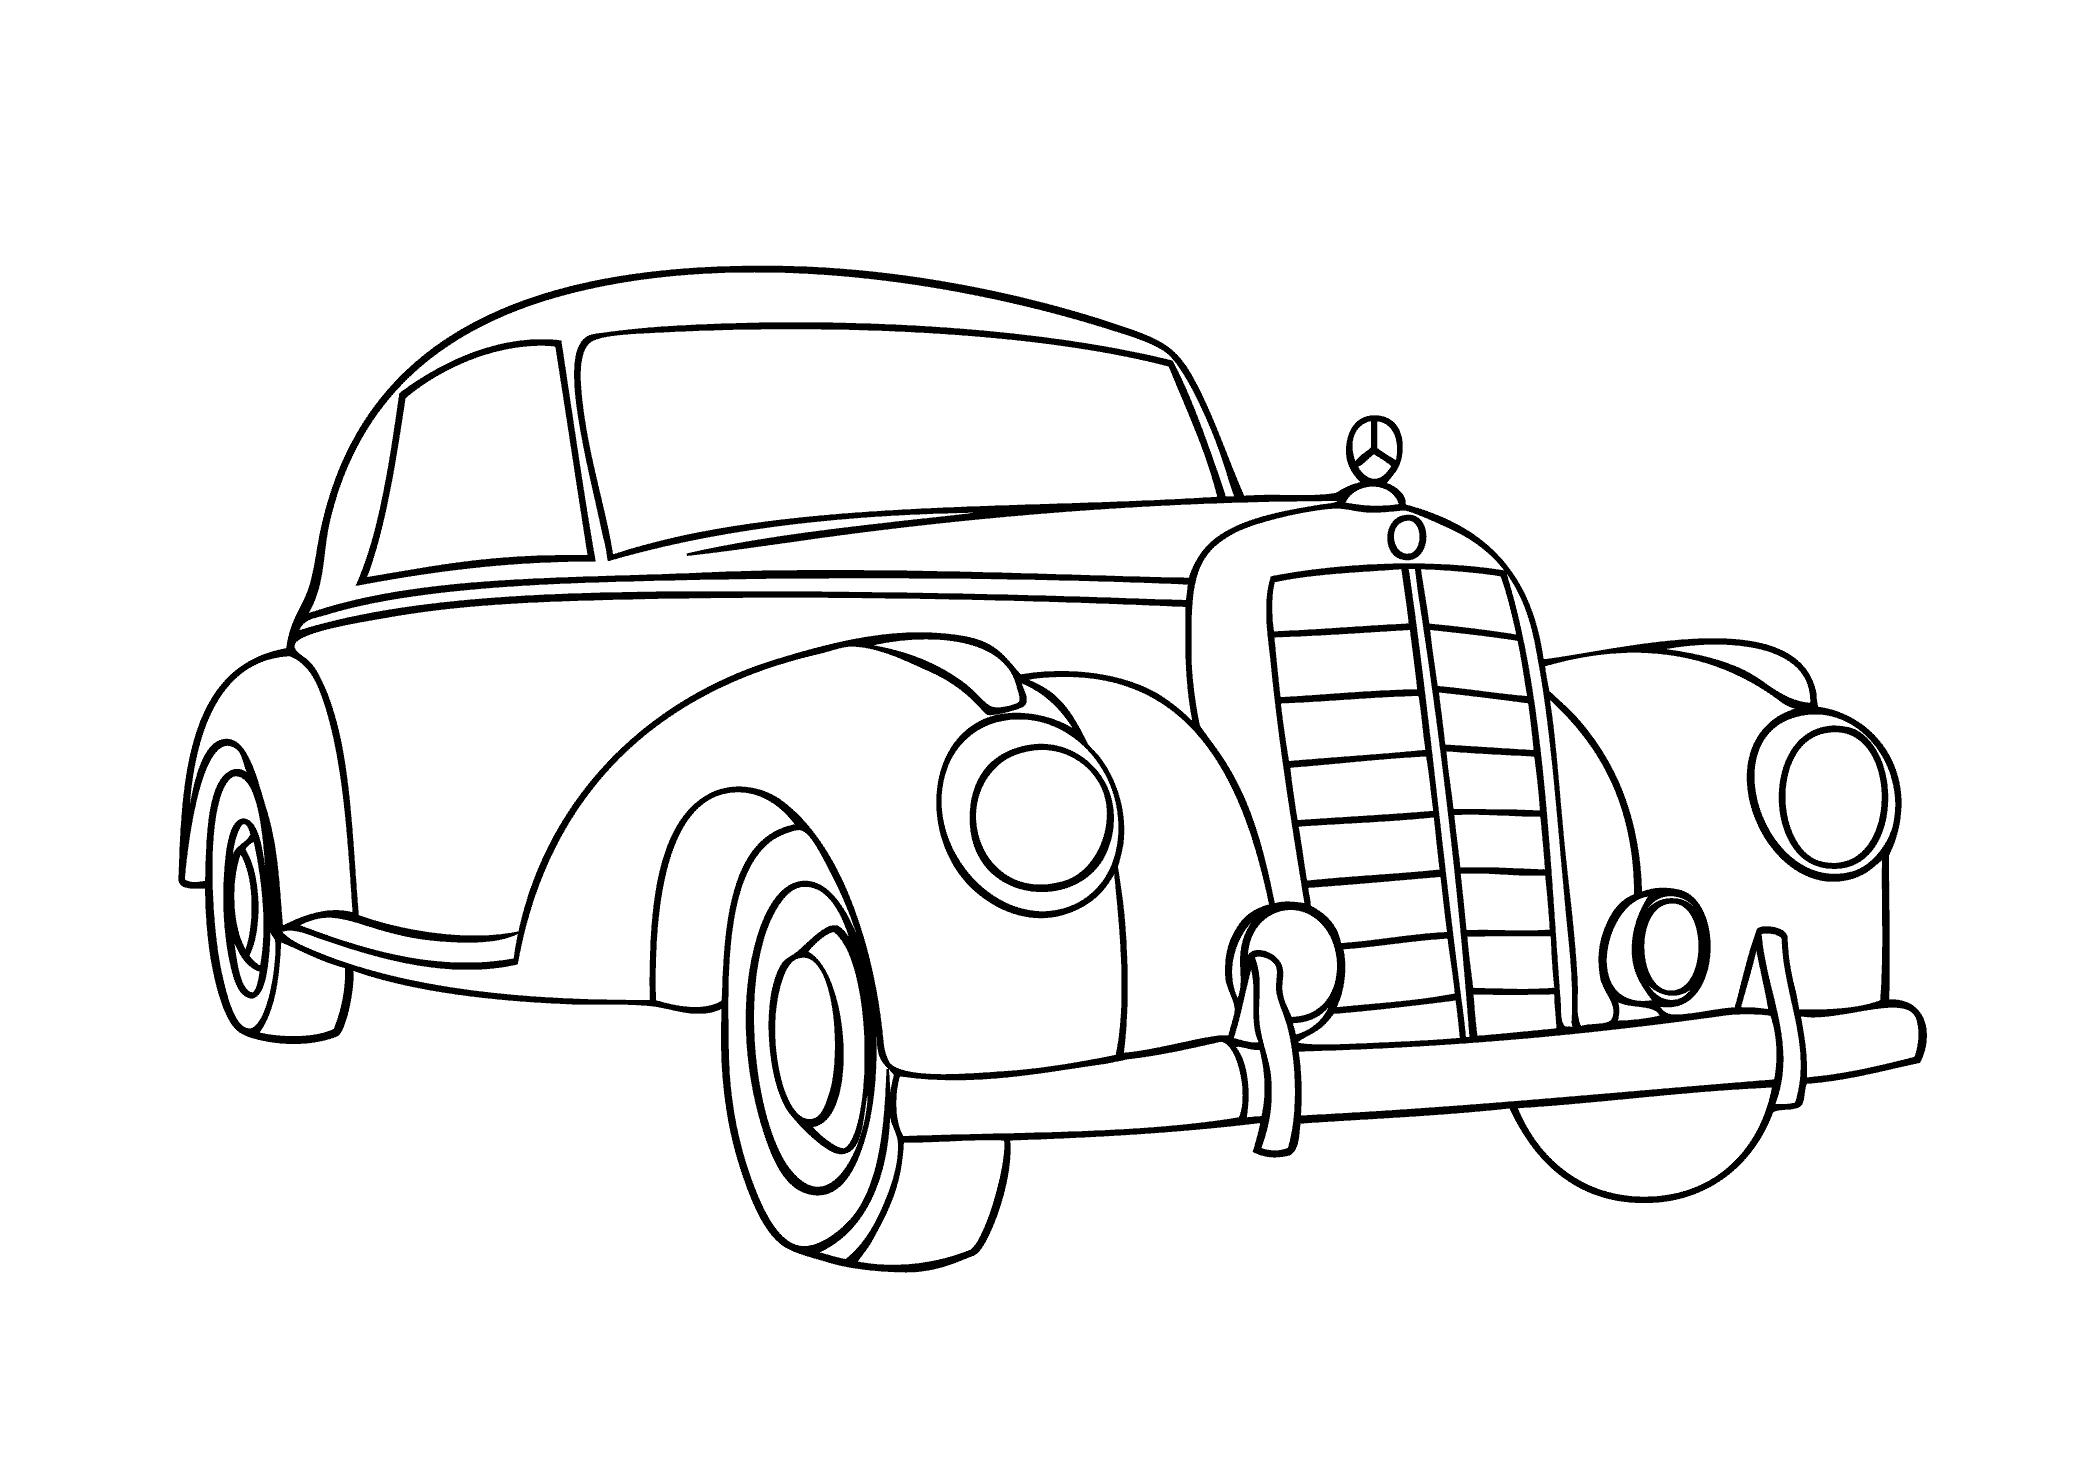 57 Chevy Coloring Pages at GetColorings.com | Free printable colorings